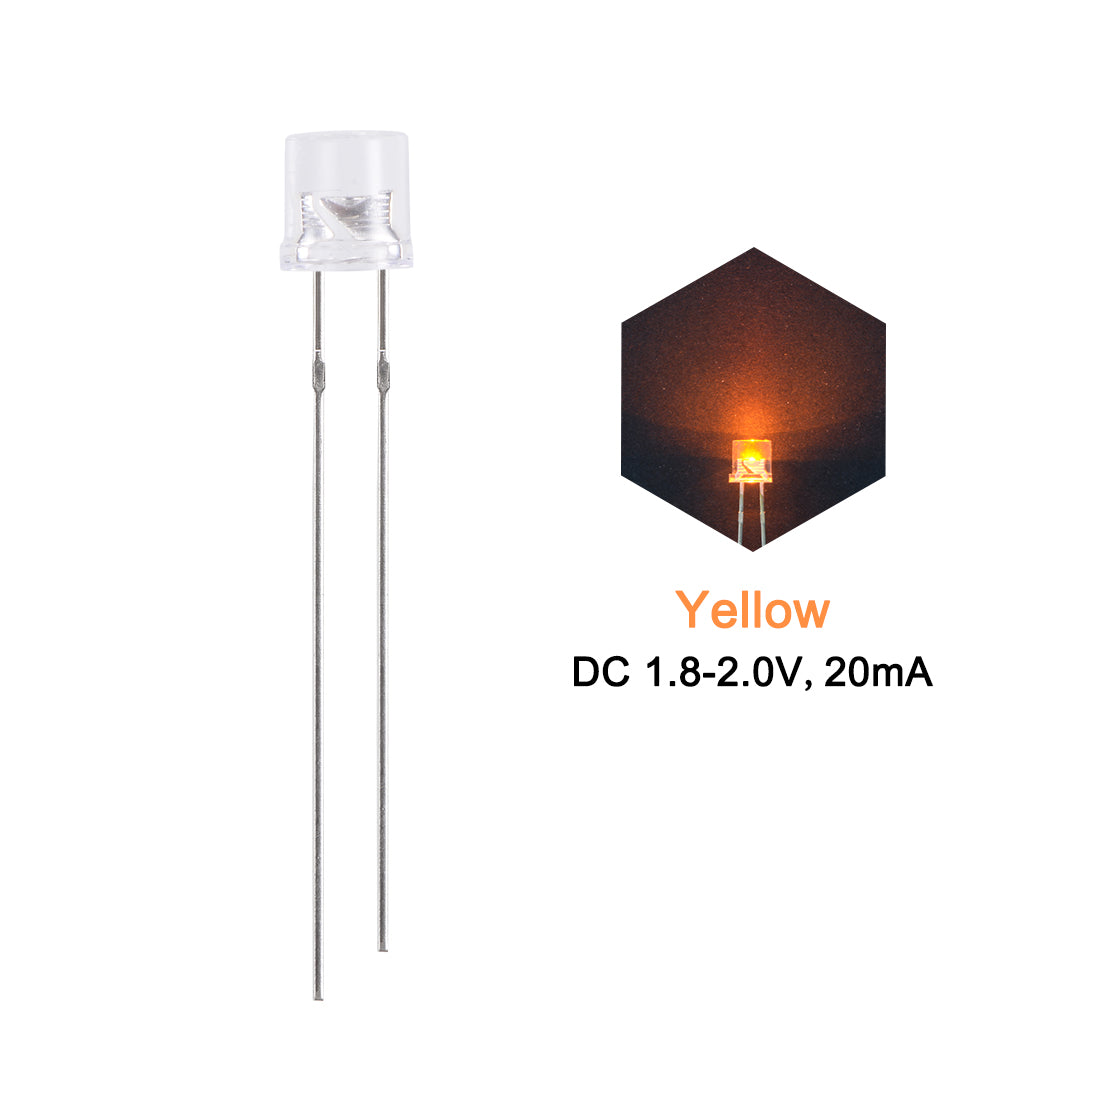 Uxcell Uxcell 10Set 5mm LED Diodes w Resistor, Clean Red DC1.8-2.0V, Flat Head 28mm Pin